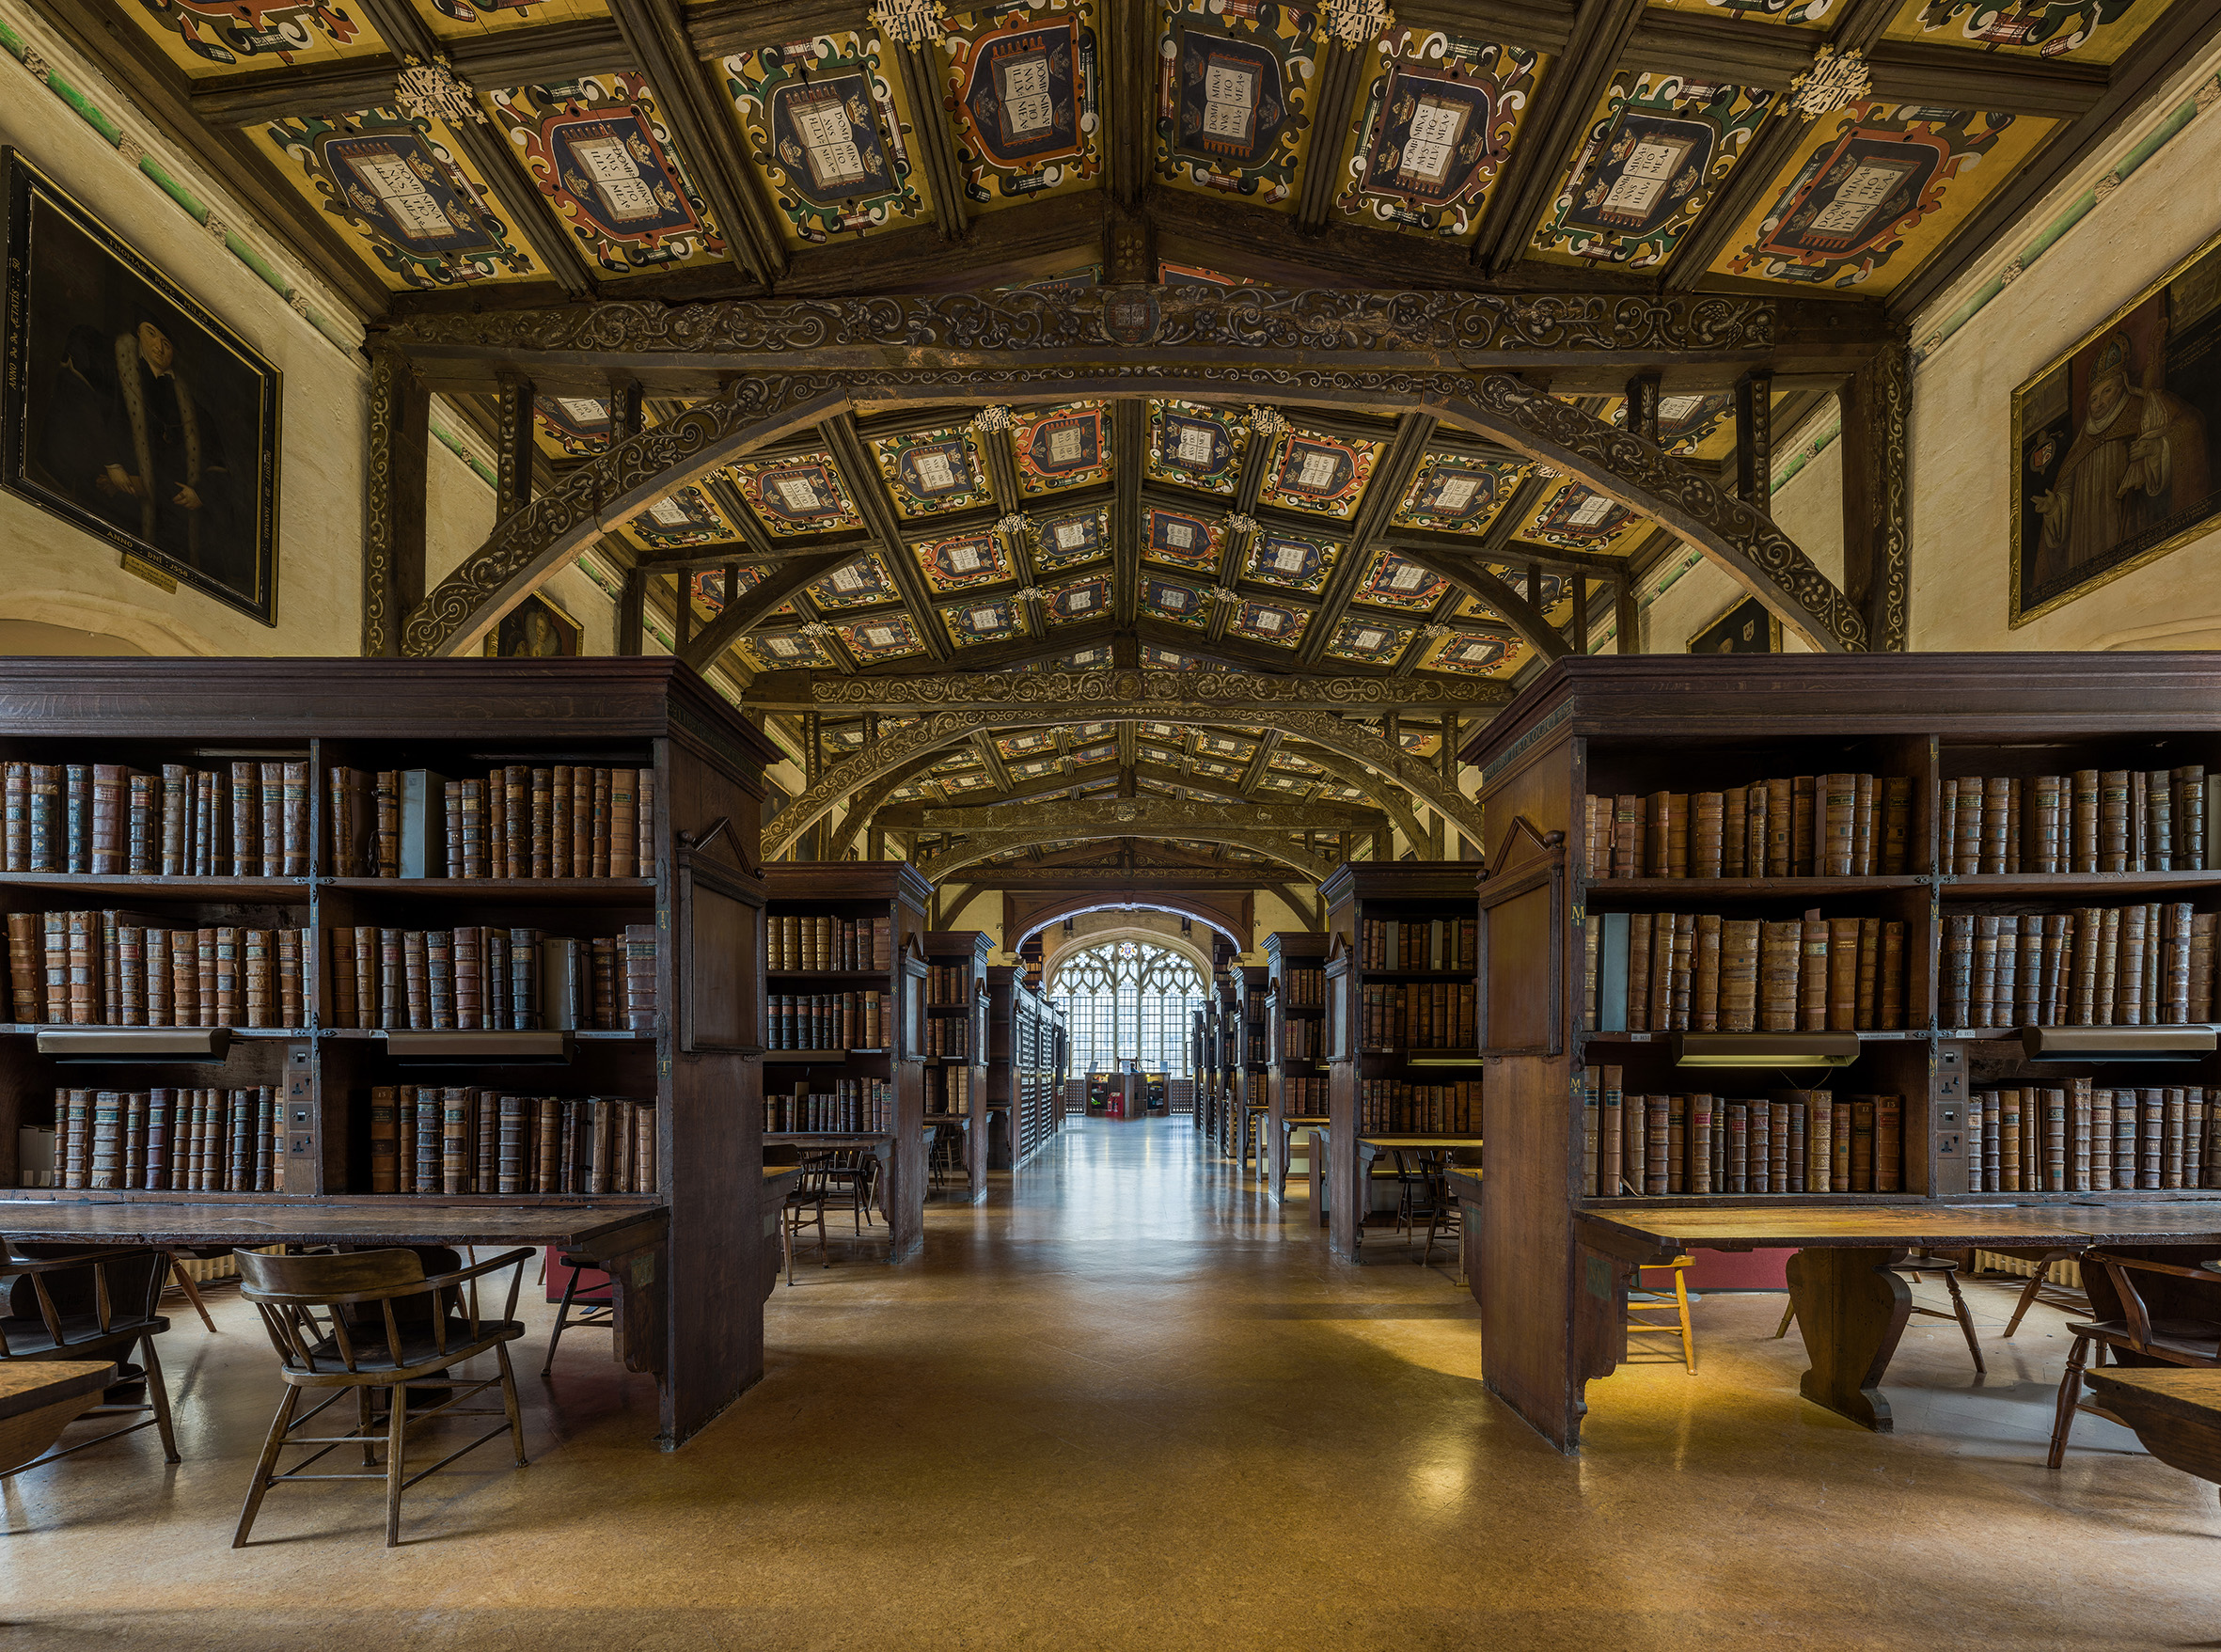 Duke Humfrey's Library Interior 6, Bodleian Library, Oxford, UK   Diliff